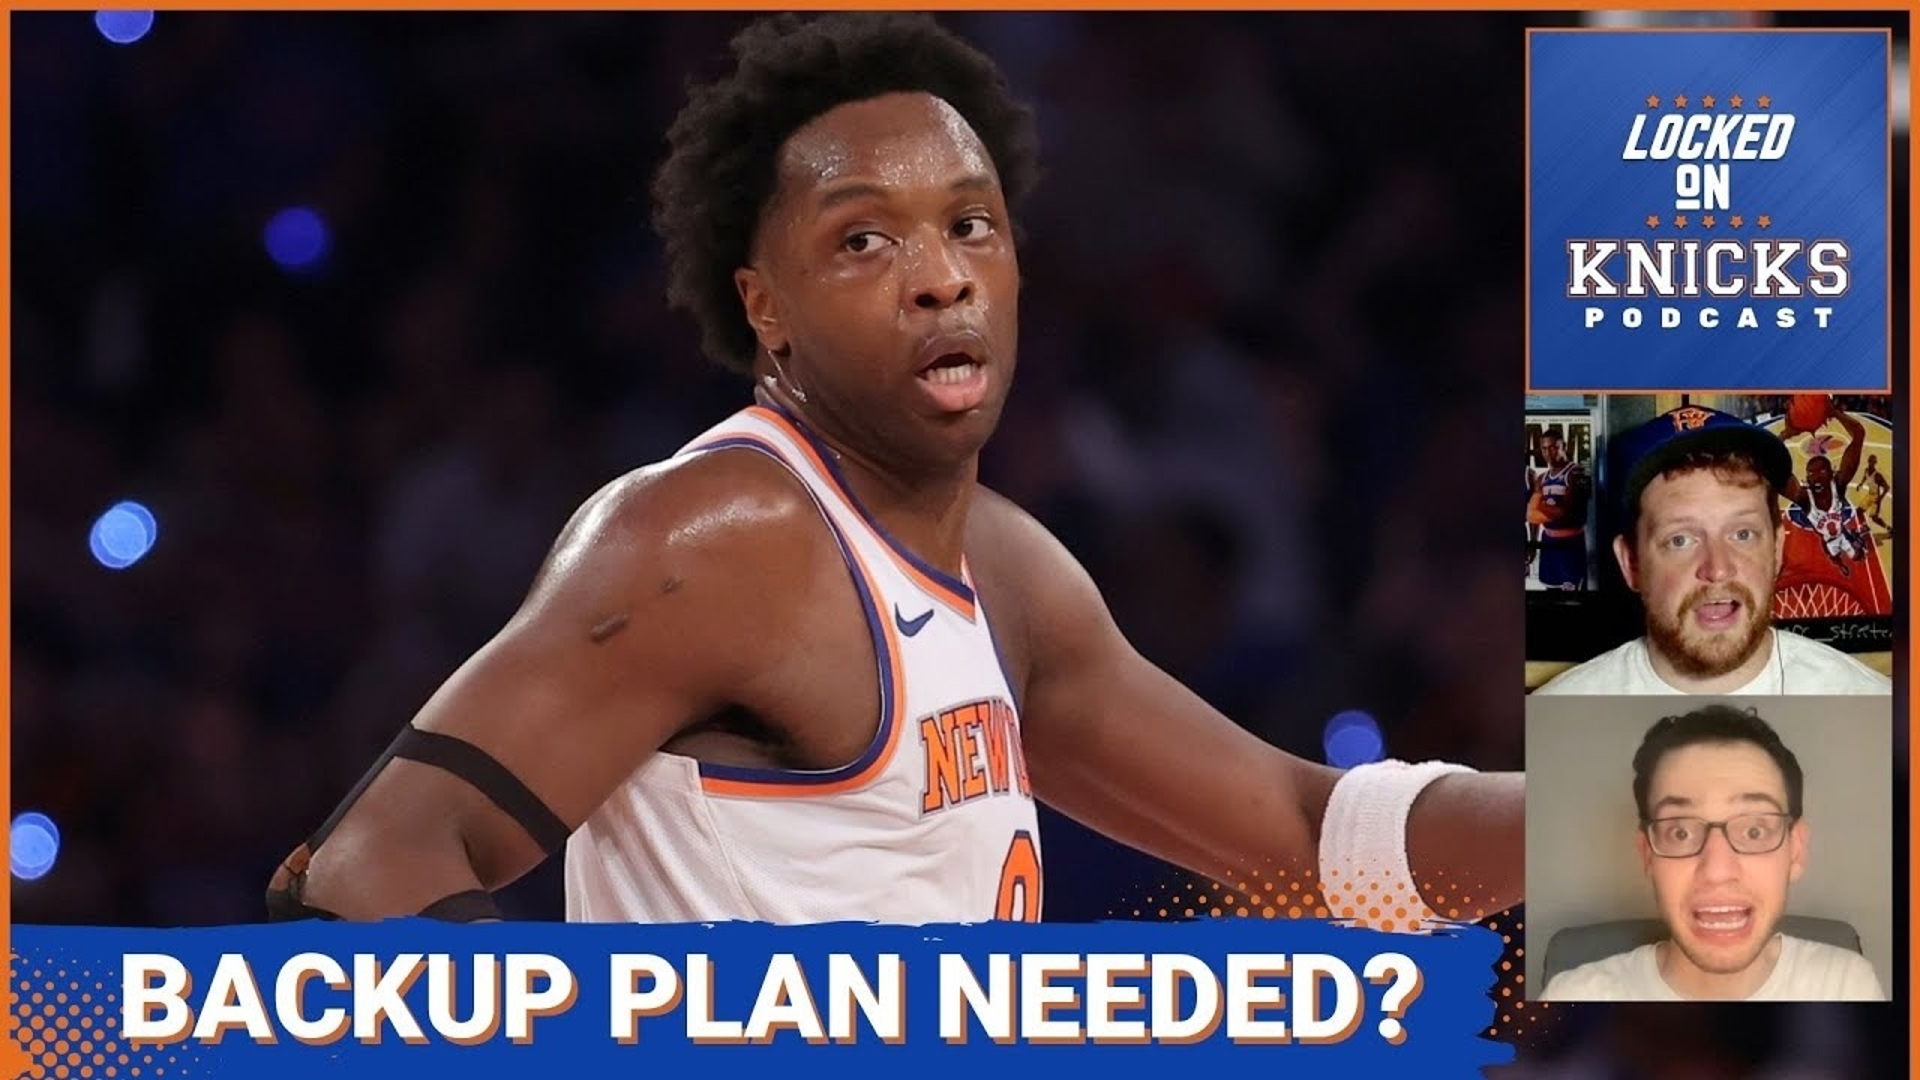 Alex and Gavin continue answering your offseason mailbag questions including: How can the Knicks get a backup plan in case OG Anunoby misses time due to injury?